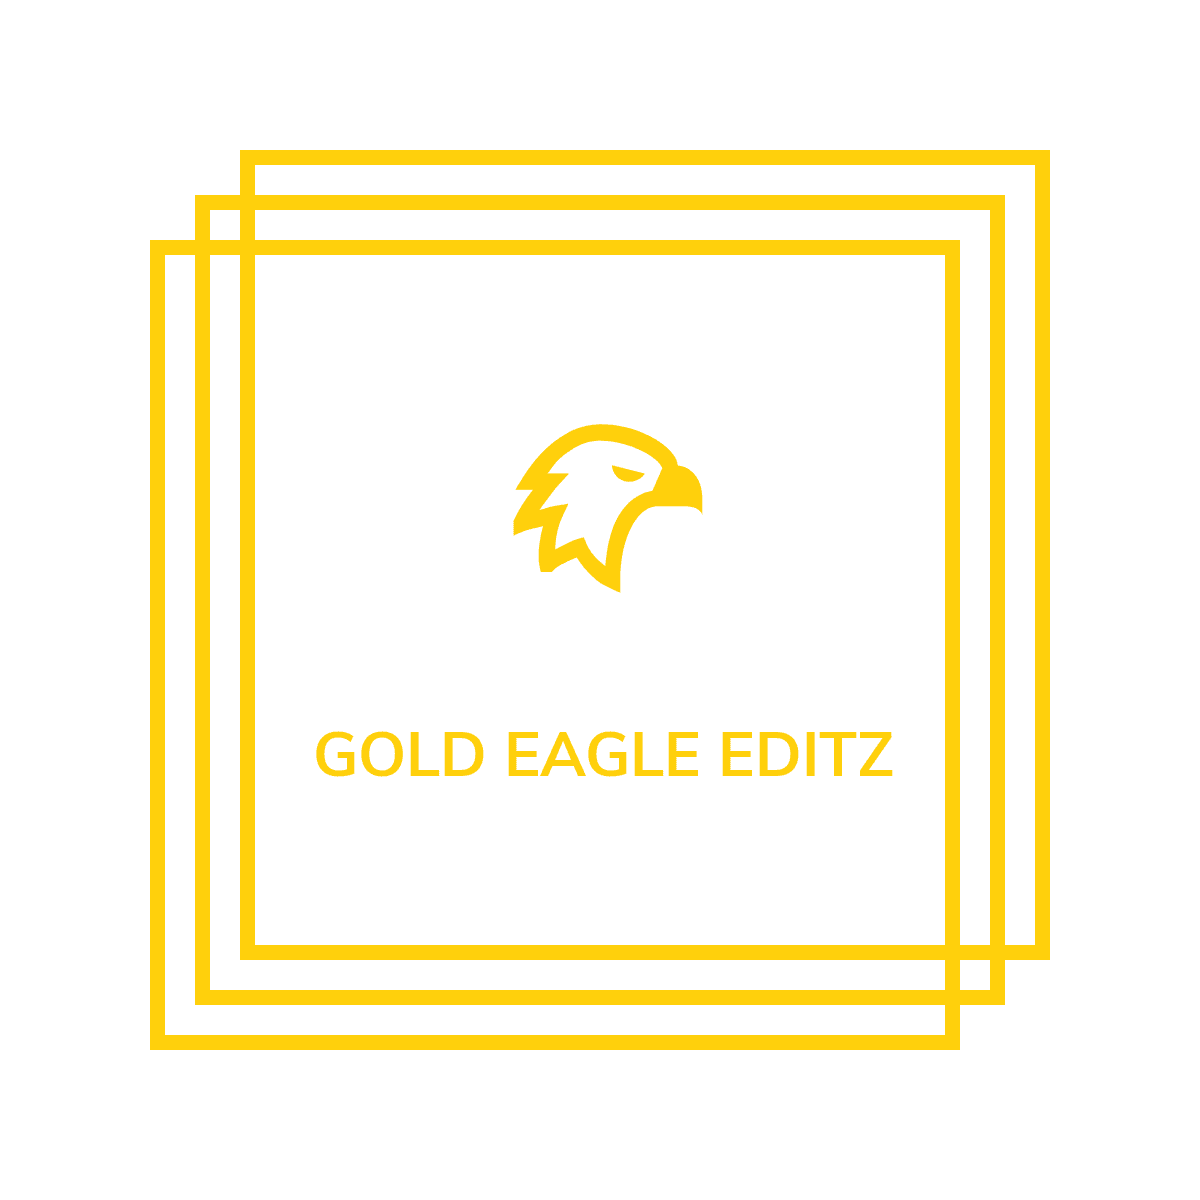 Gold Eagle Editz and Photography